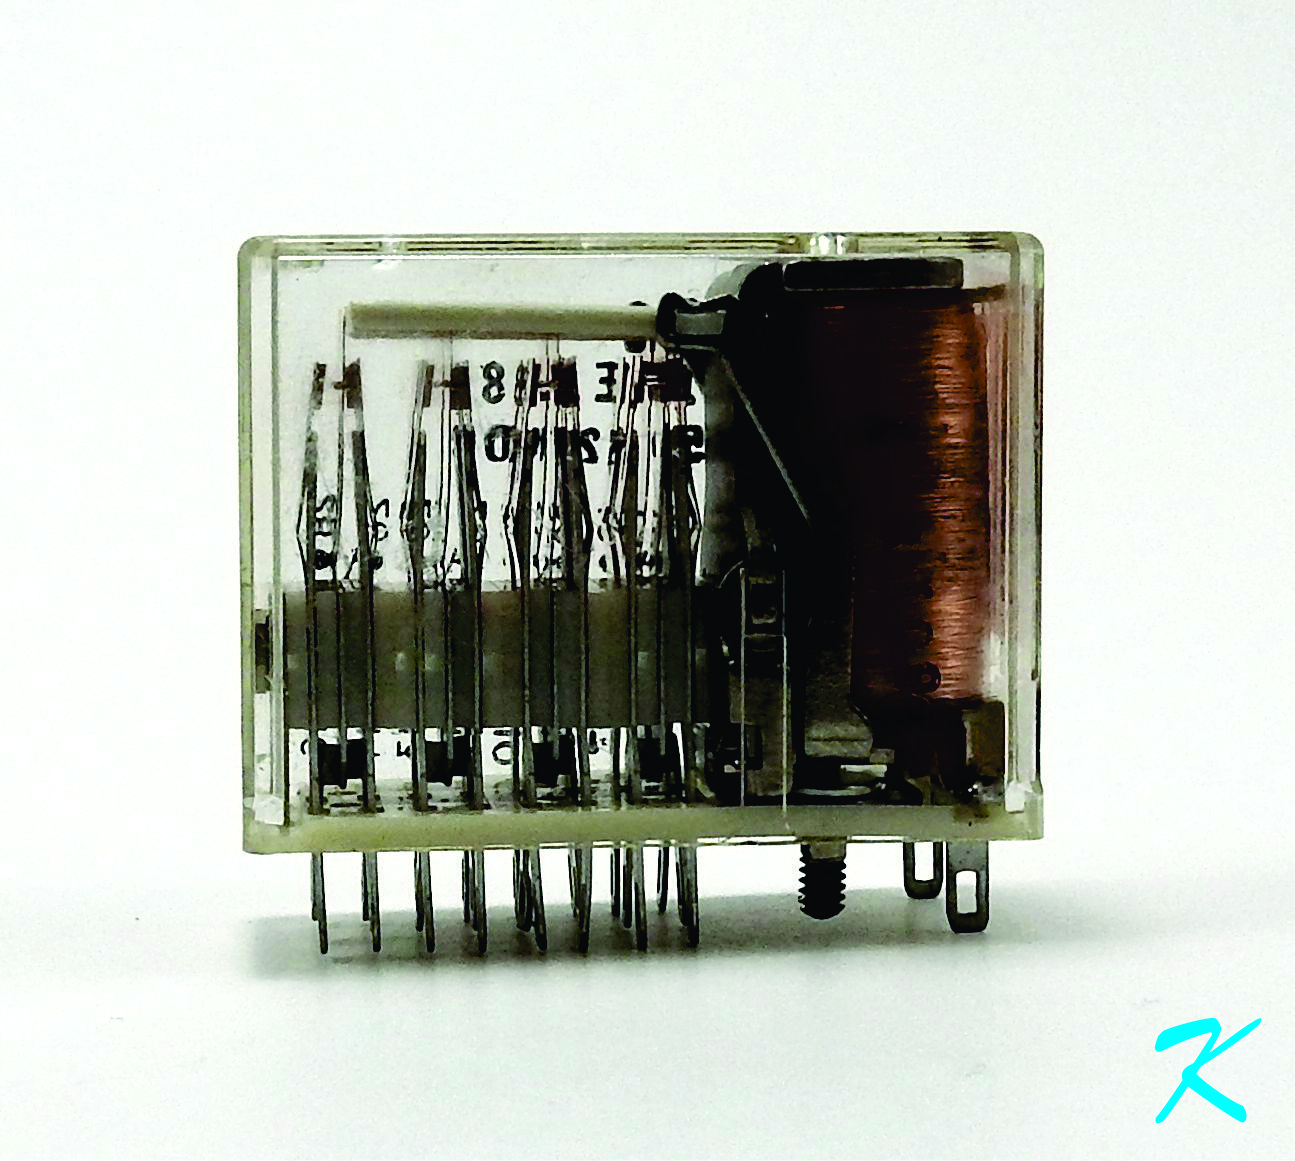  An 8PDT relay has eight sets of contacts. The contacts may conduct electricity either way, depending on whether the relay is in an active or non-active condition 